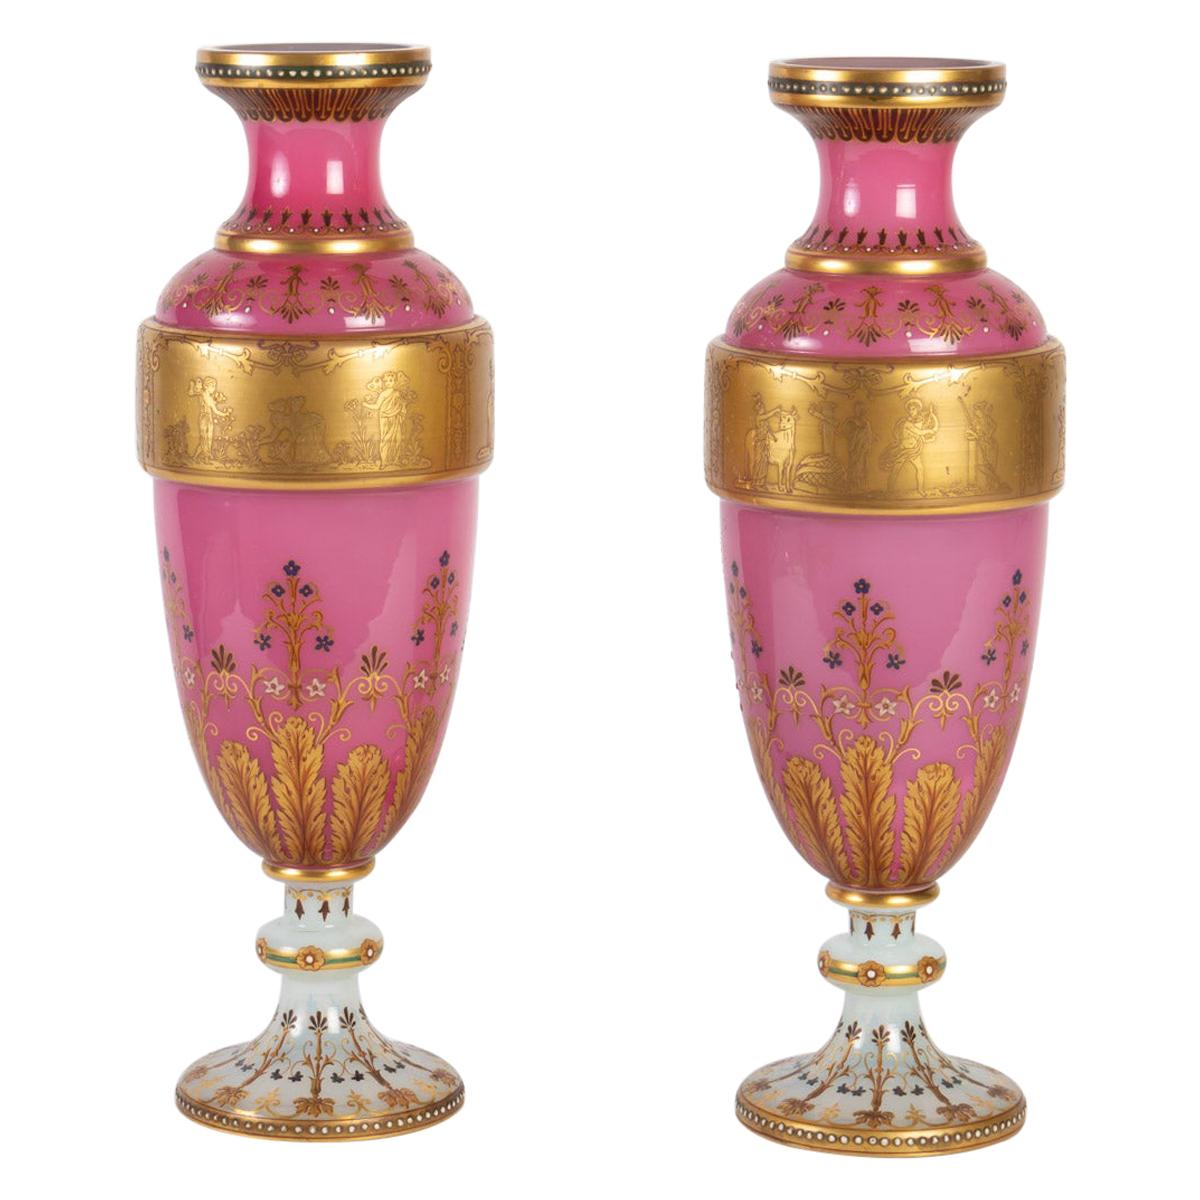 Pair of Opaline Vases, Moser, Lined with White and Pink Opaline